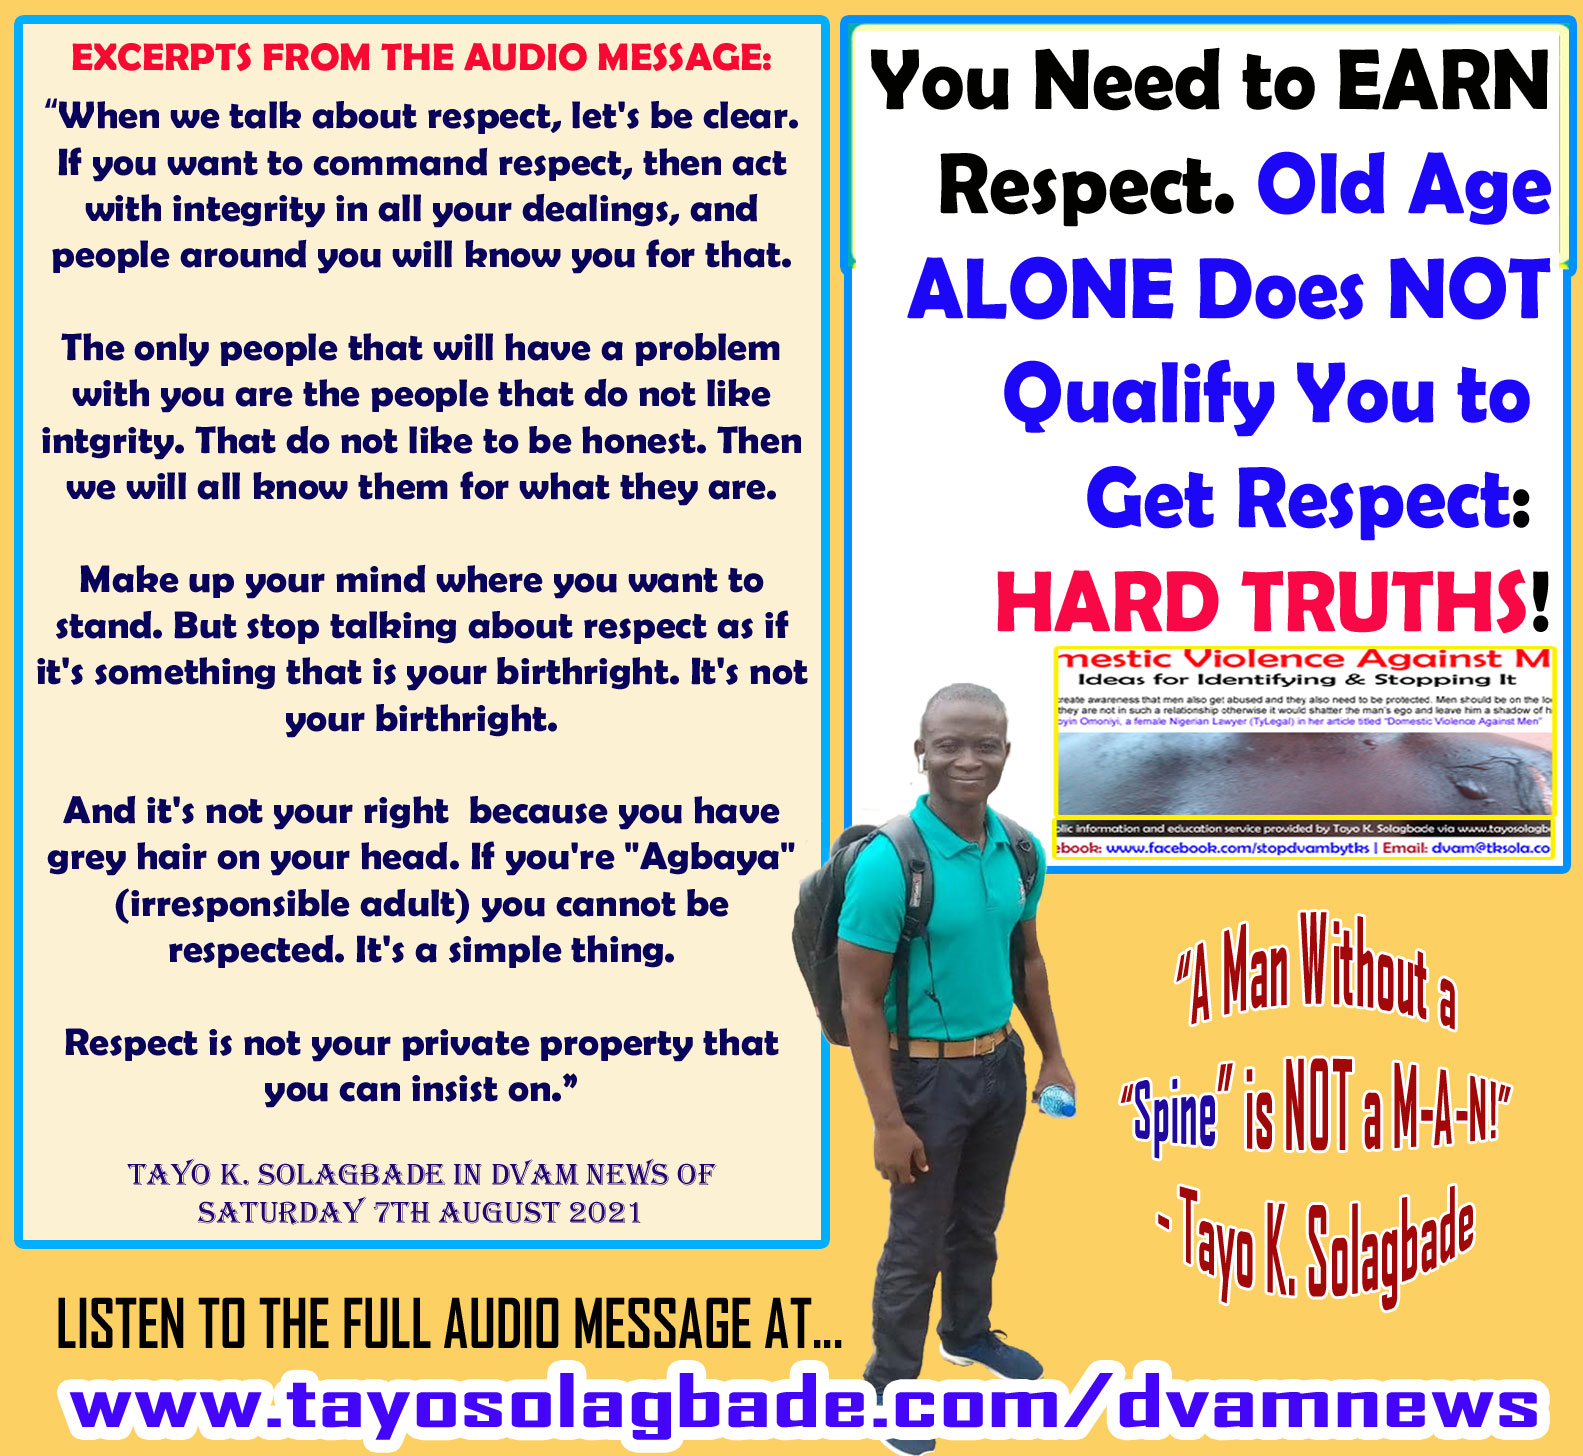 Click HERE to listen to the full message - dvam-news-7th-August-2021